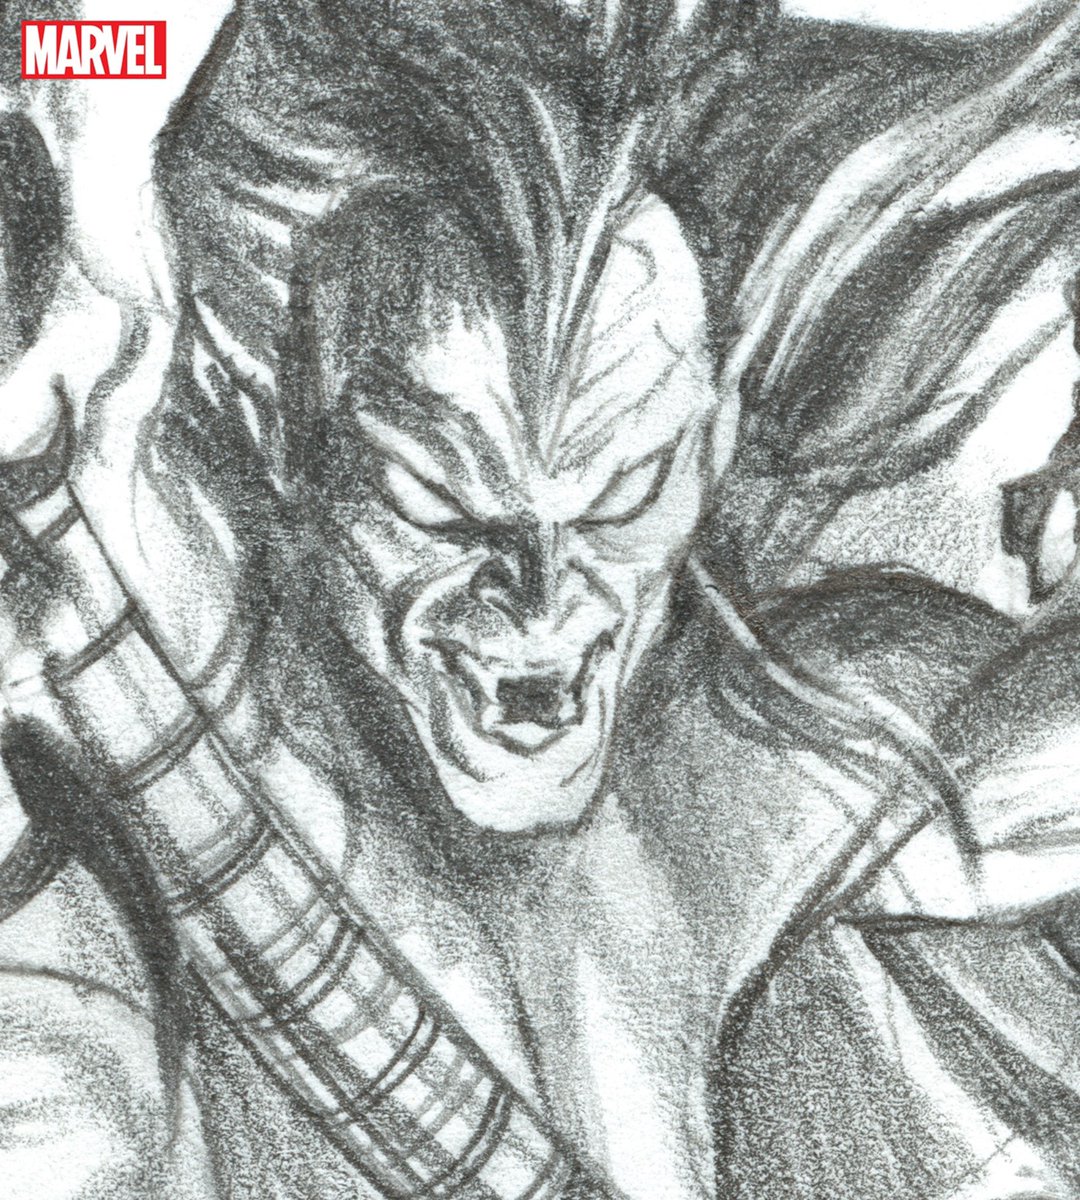 Timeless Villains: Wave 1-sketch variants will be available for pre-order starting February 9th! Very limited quantities, so be sure to join the waitlist here: https://t.co/tjbKVqTeH5

#marvelcomics #marvel #makeminemarvel #comicbooks #comicart 